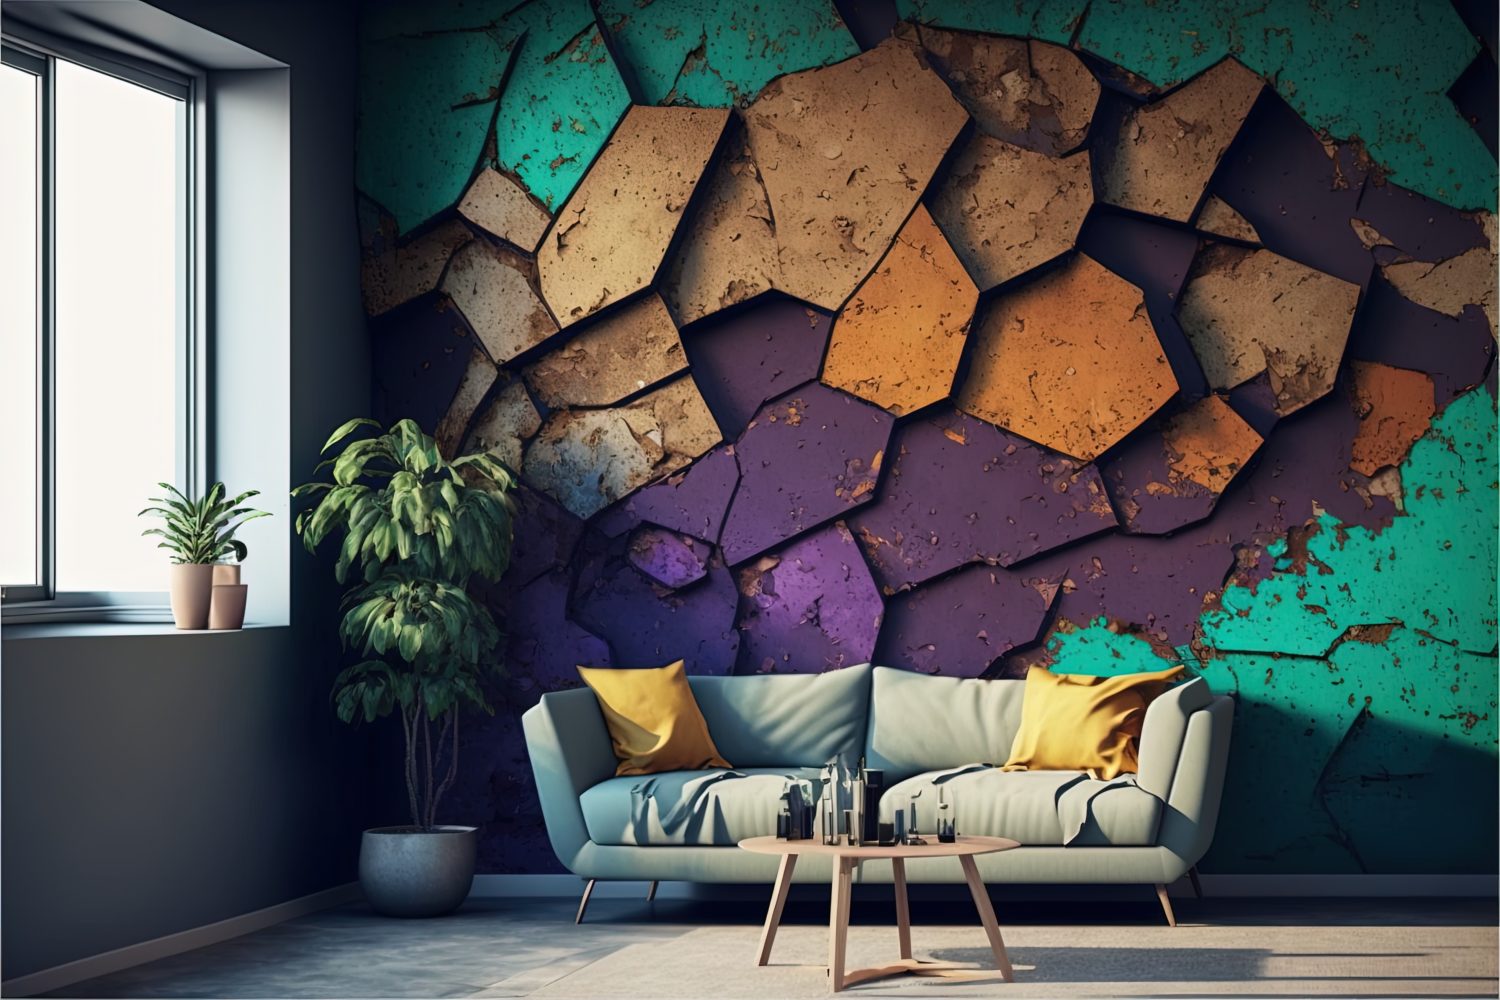 Interior Design: Textured Wall Art Is Making a Comeback